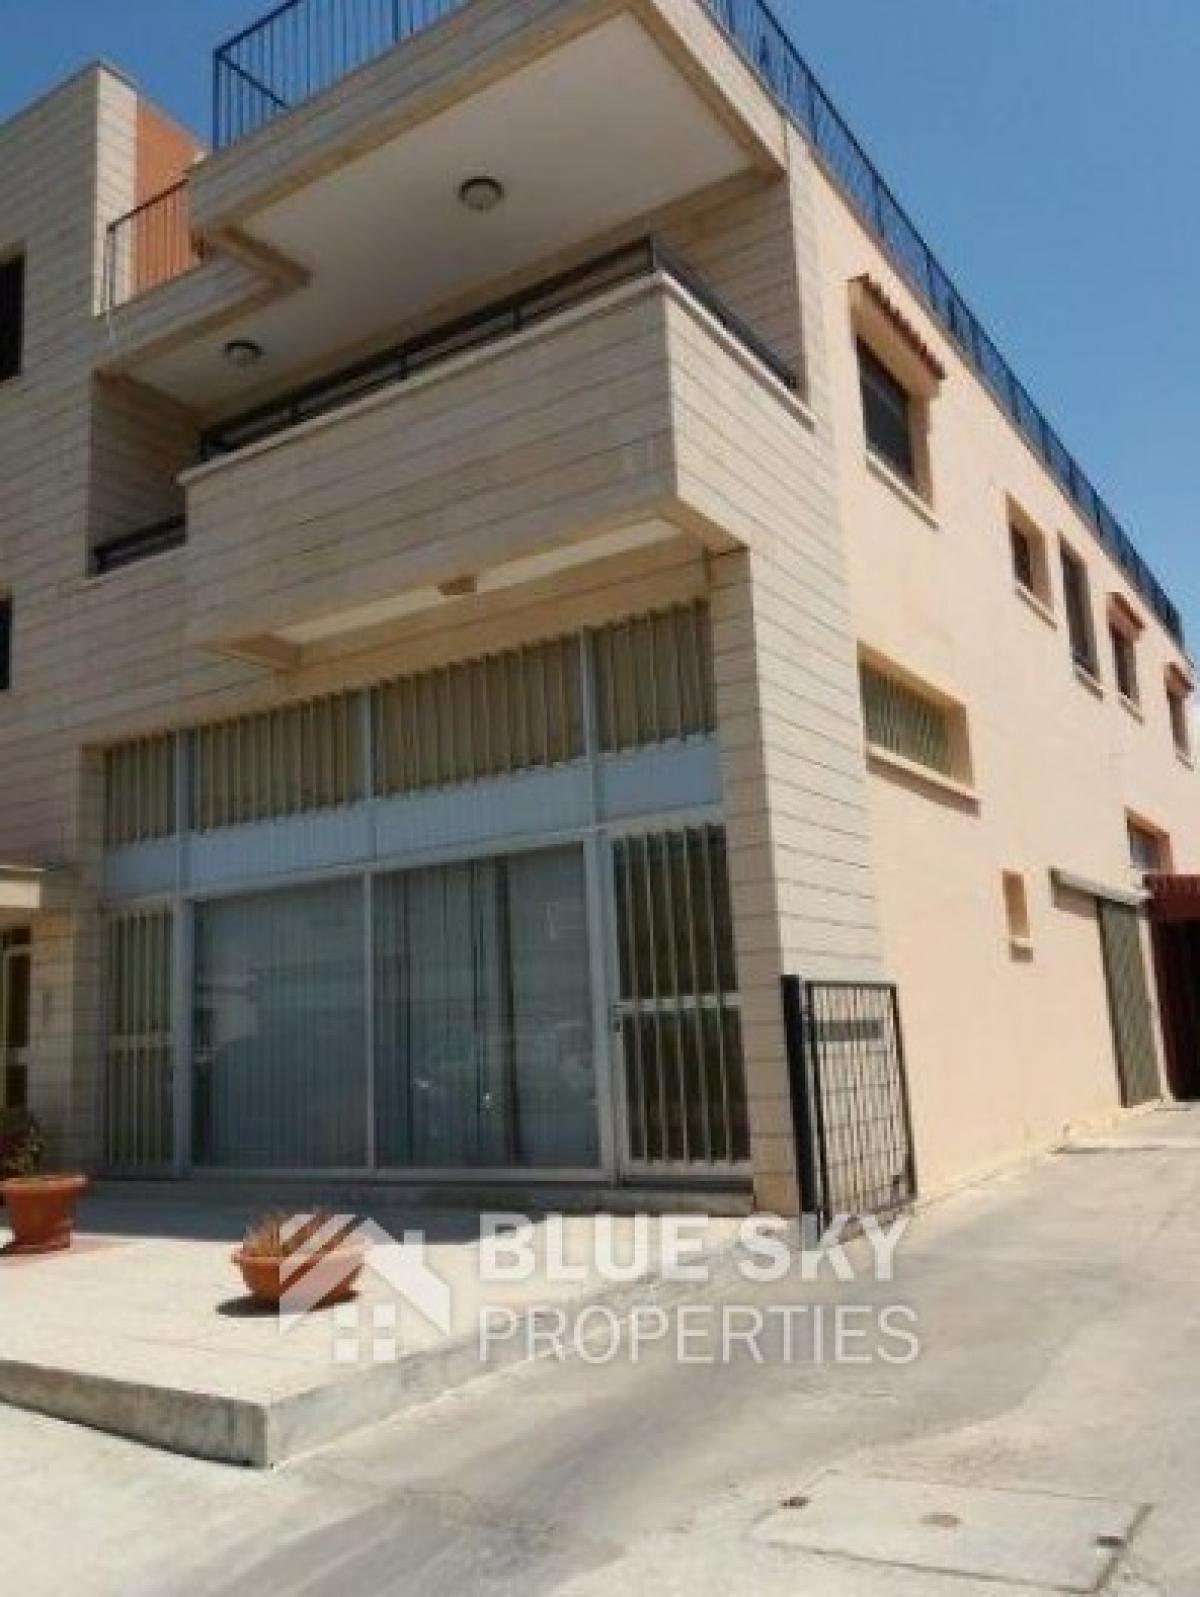 Picture of Home For Sale in Zakaki, Limassol, Cyprus